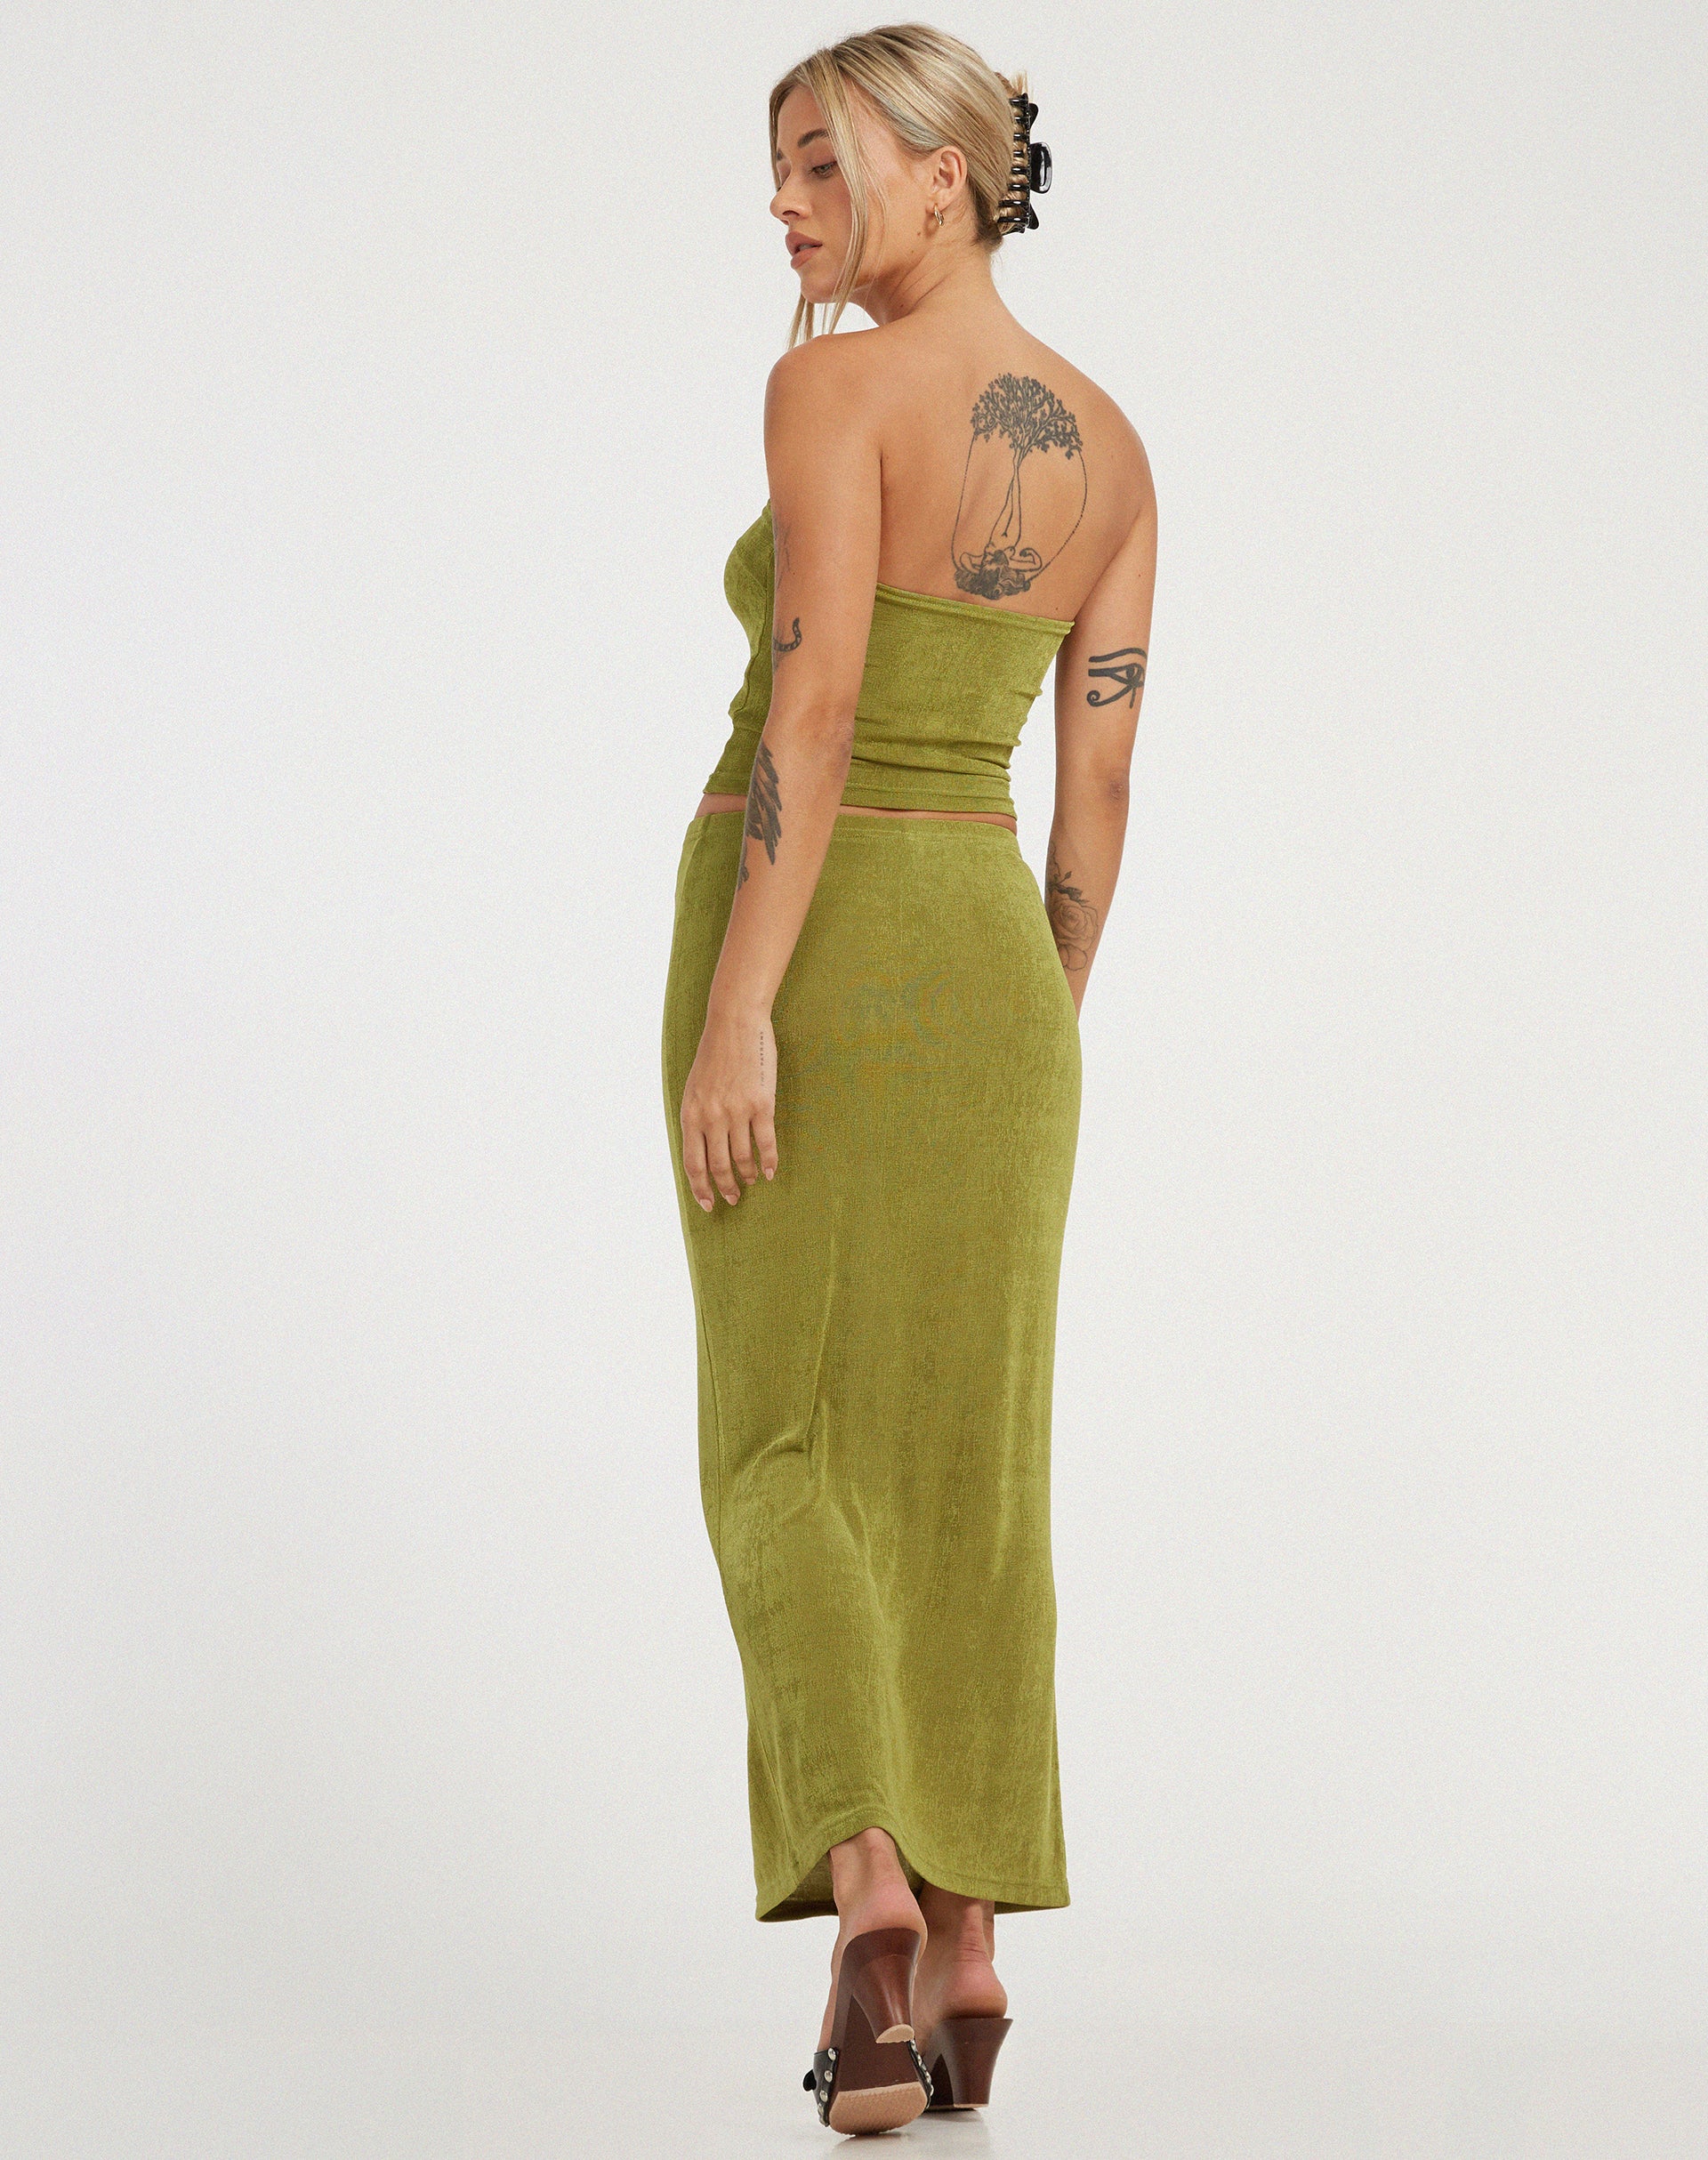 image of Tulus Maxi Skirt in Lime